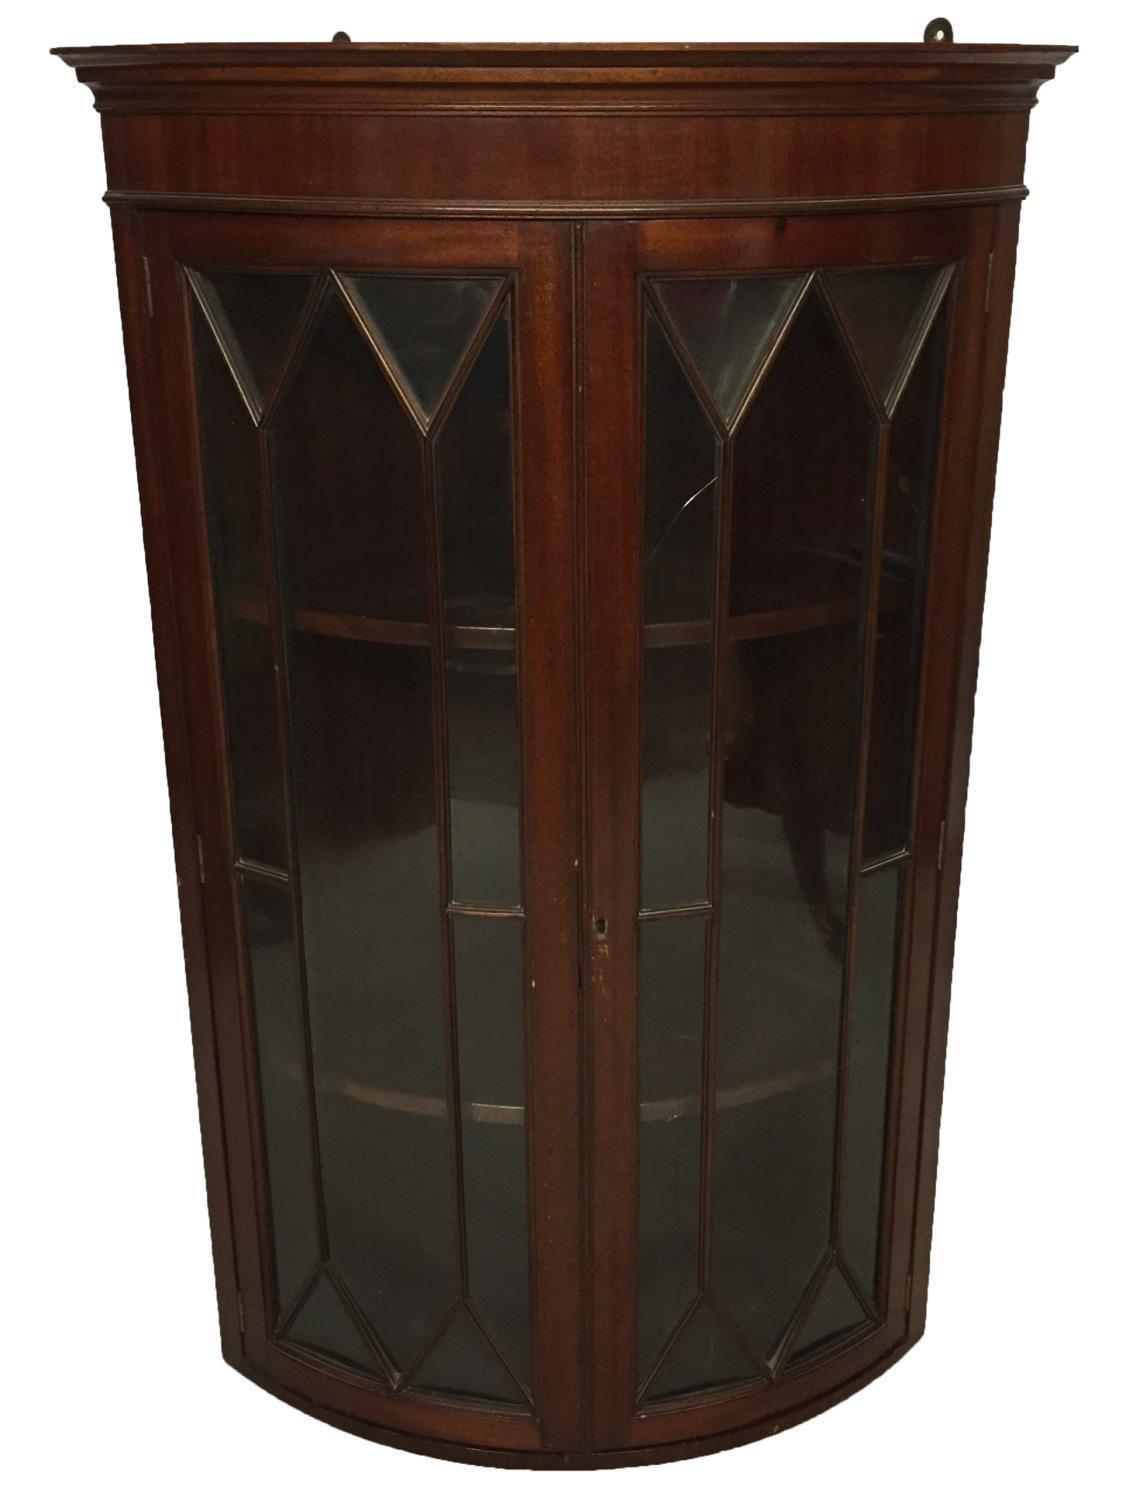 A REGENCY STYLE MAHOGANY BOW FRONTED CORNER CABINETwith two glazed doors66 x 47 x 105 cm - Image 2 of 2